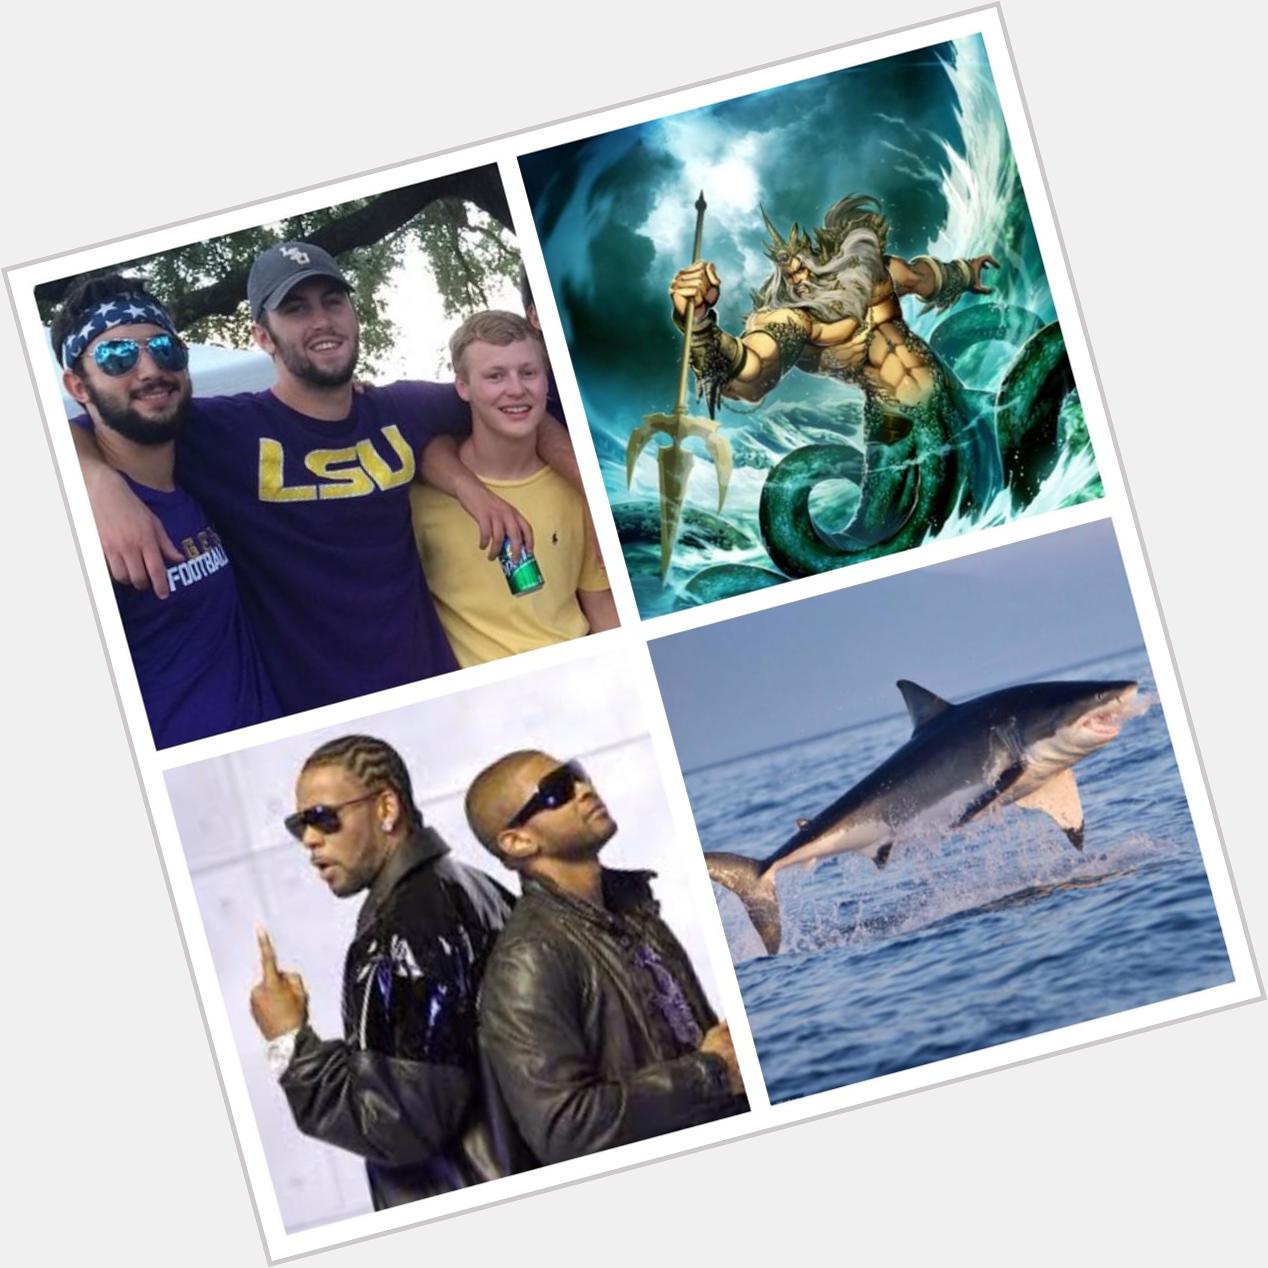 Happy birthday R. Kelly to my Usher. I hope Poseidon believes you when you say it. Hah shark above water 